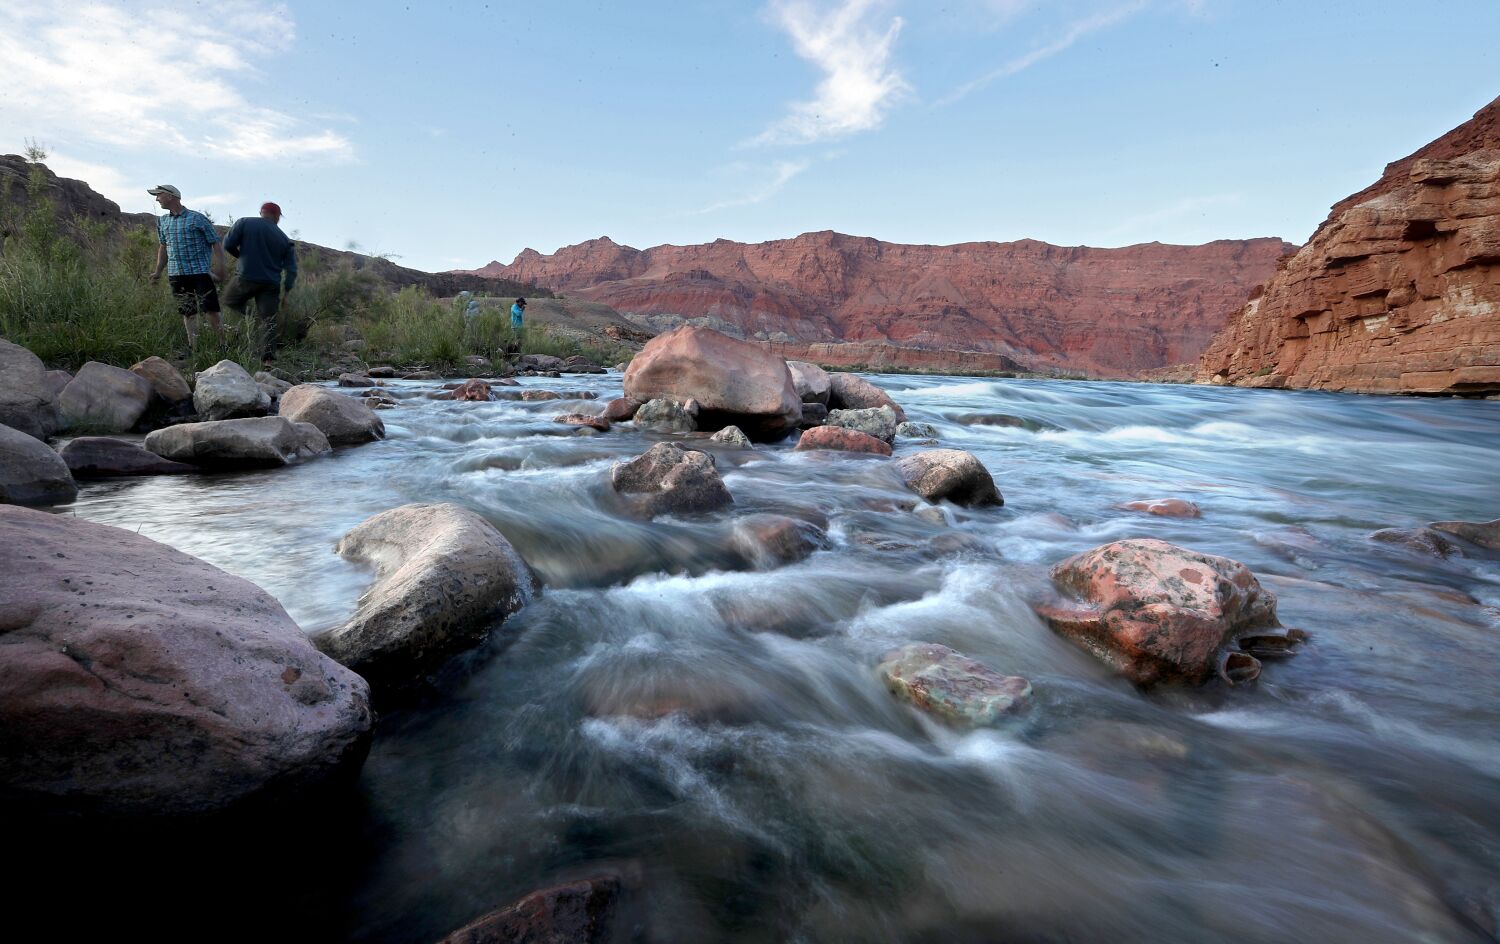 Tribes seek greater involvement in talks on Colorado River water crisis